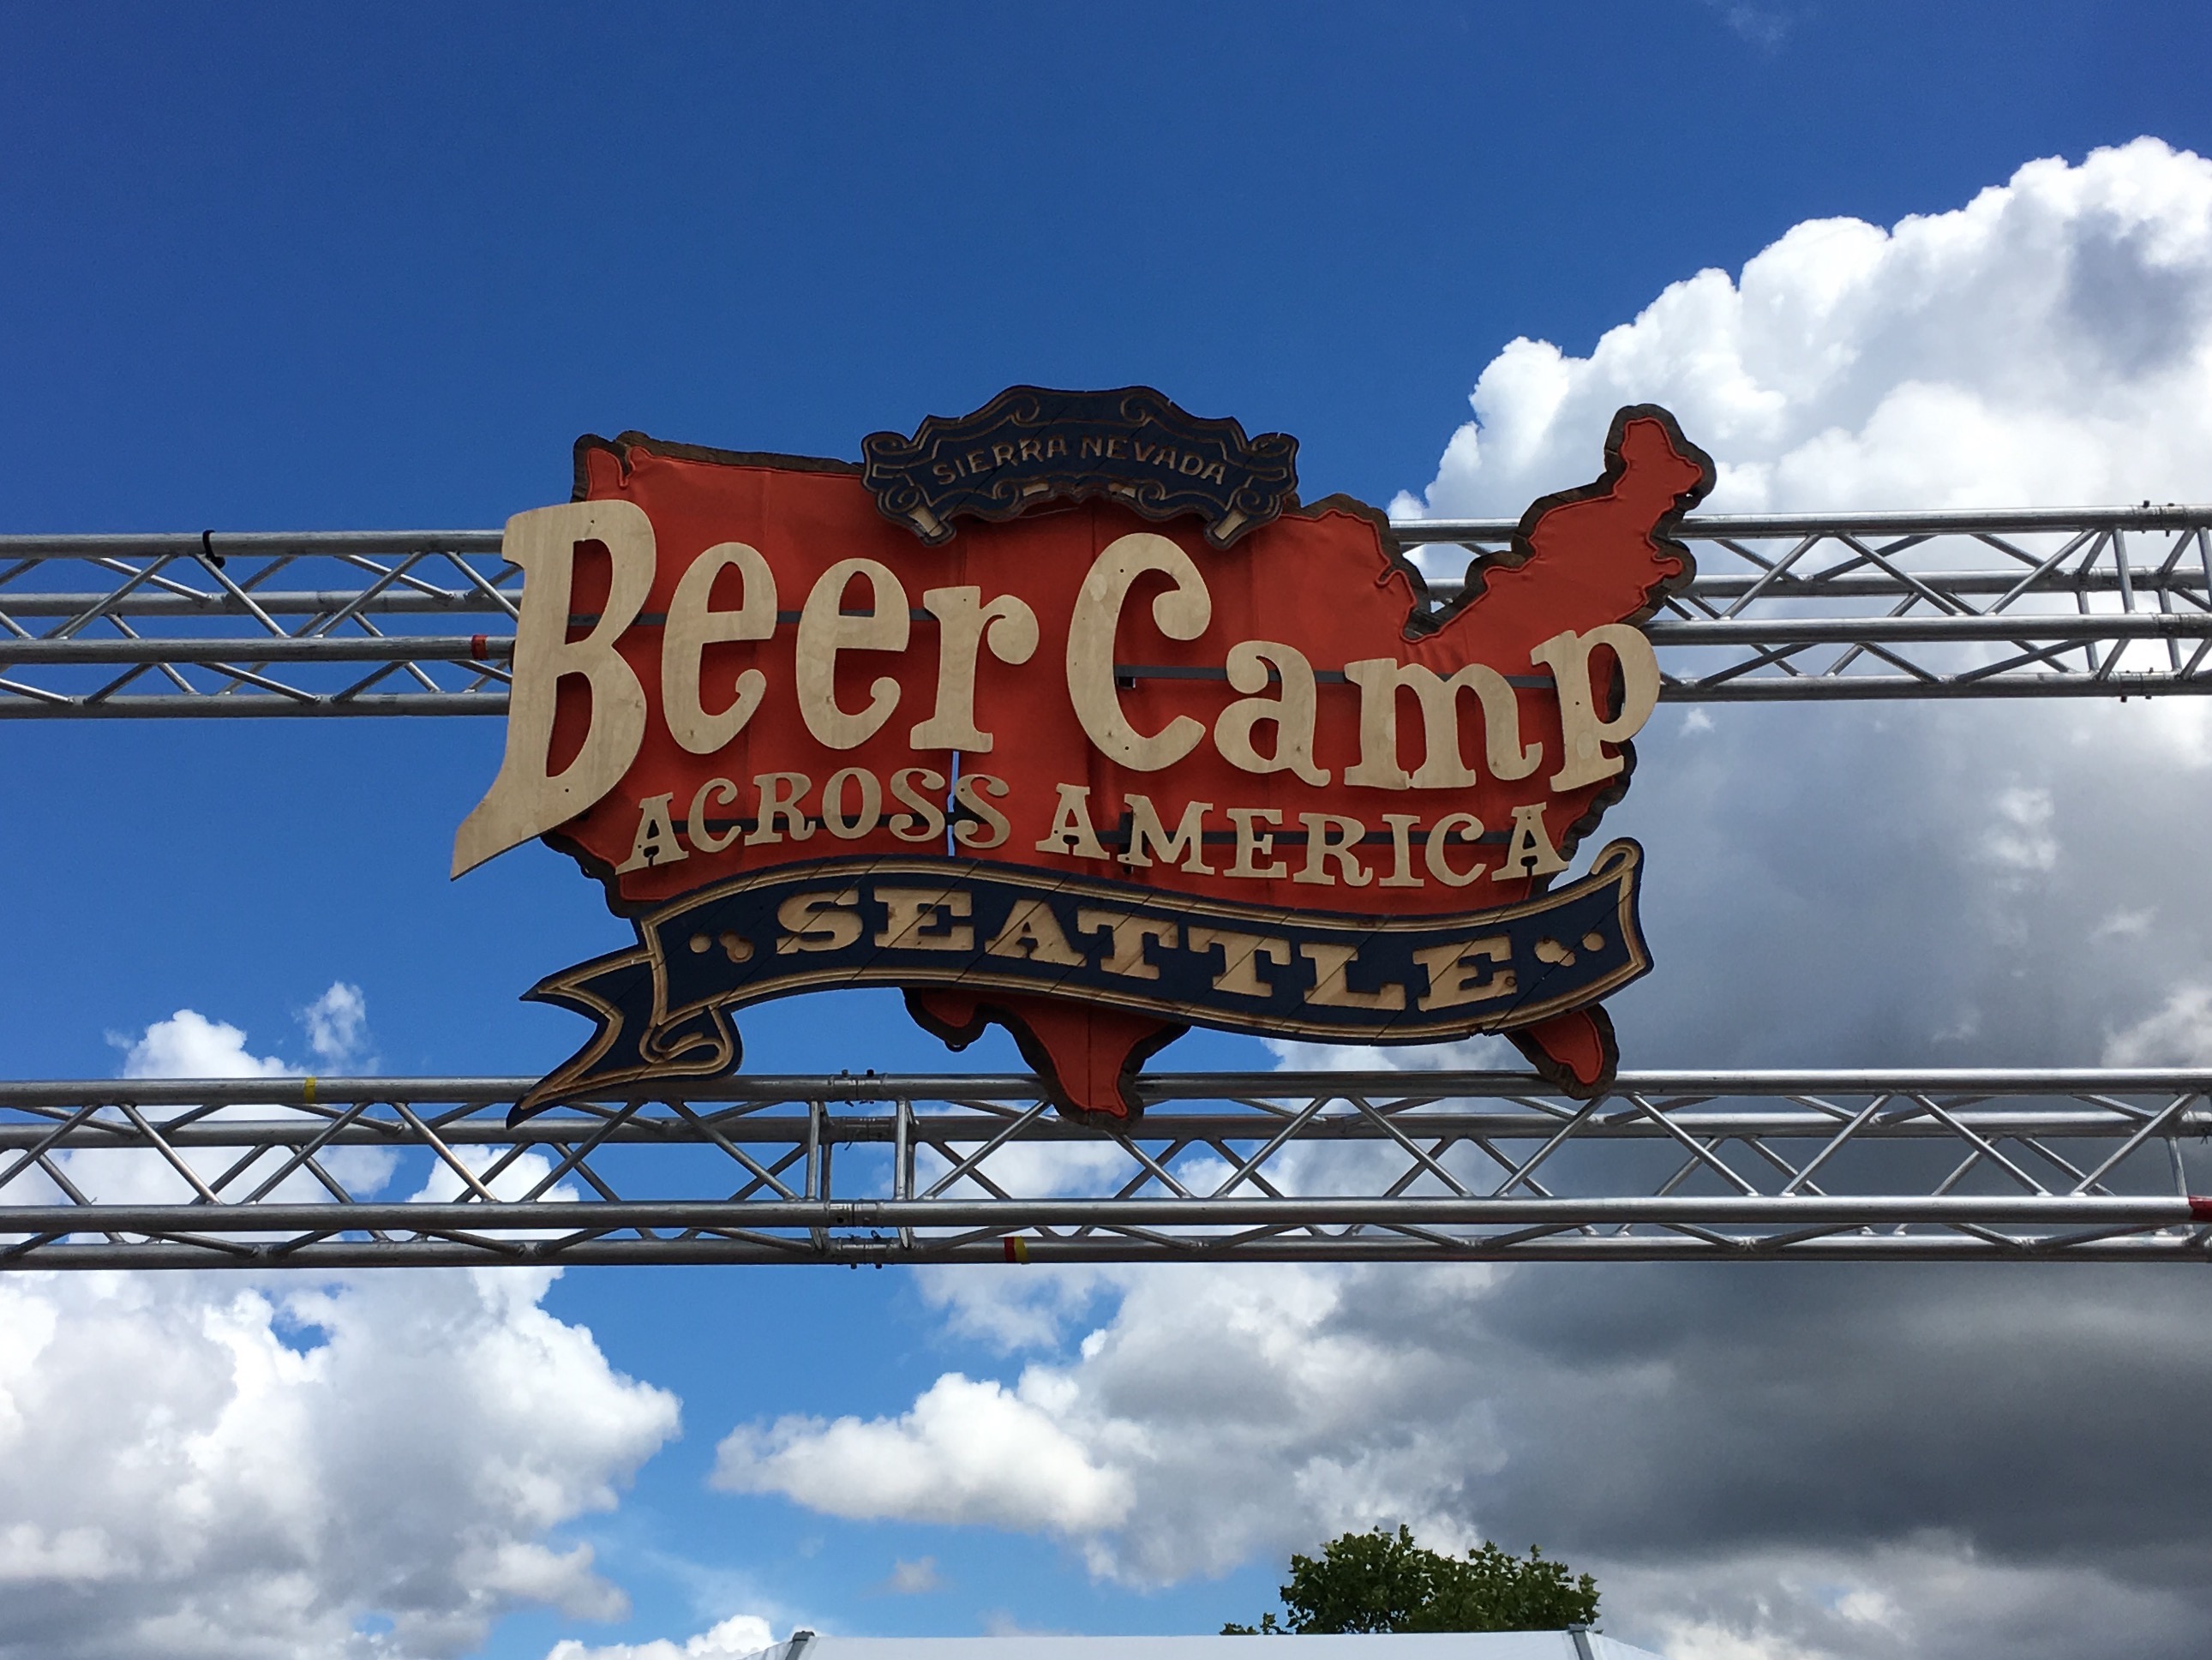 The welcoming sign that greeted attendees at Sierra Nevada Beer Camp Across America Festival in Seattle. (photo by D.J. Paul)